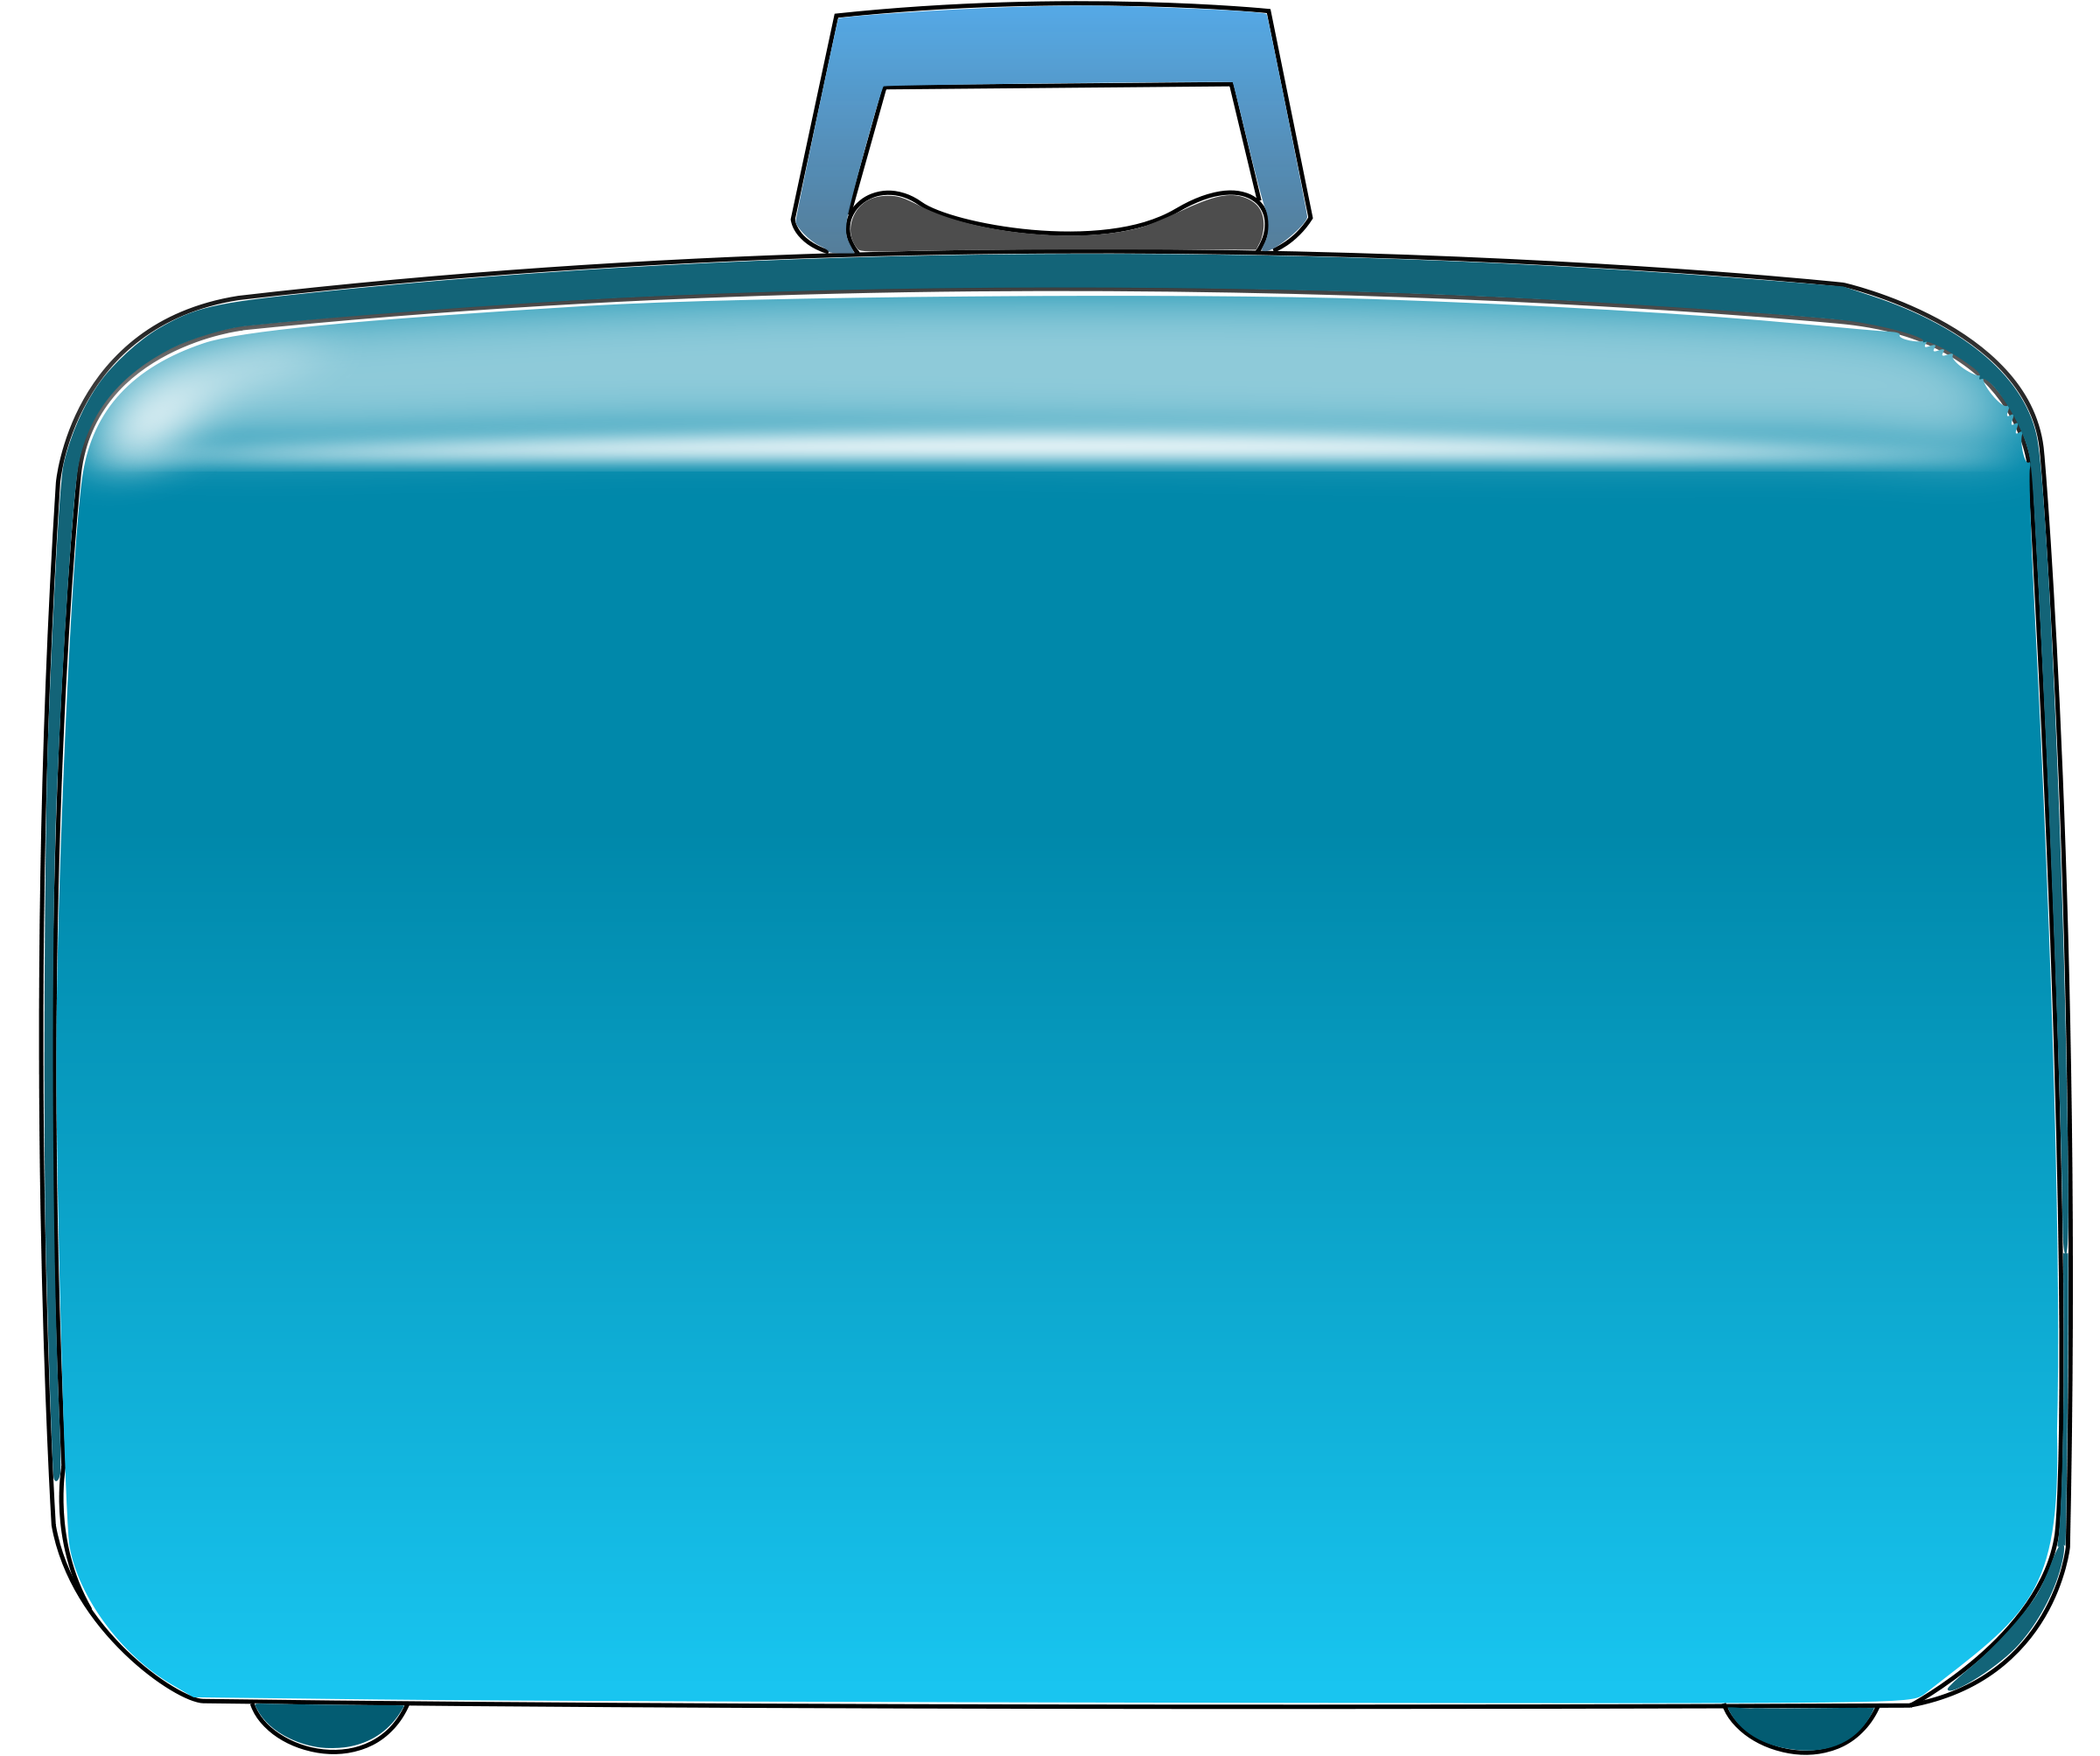 Suitcase isolated over white.